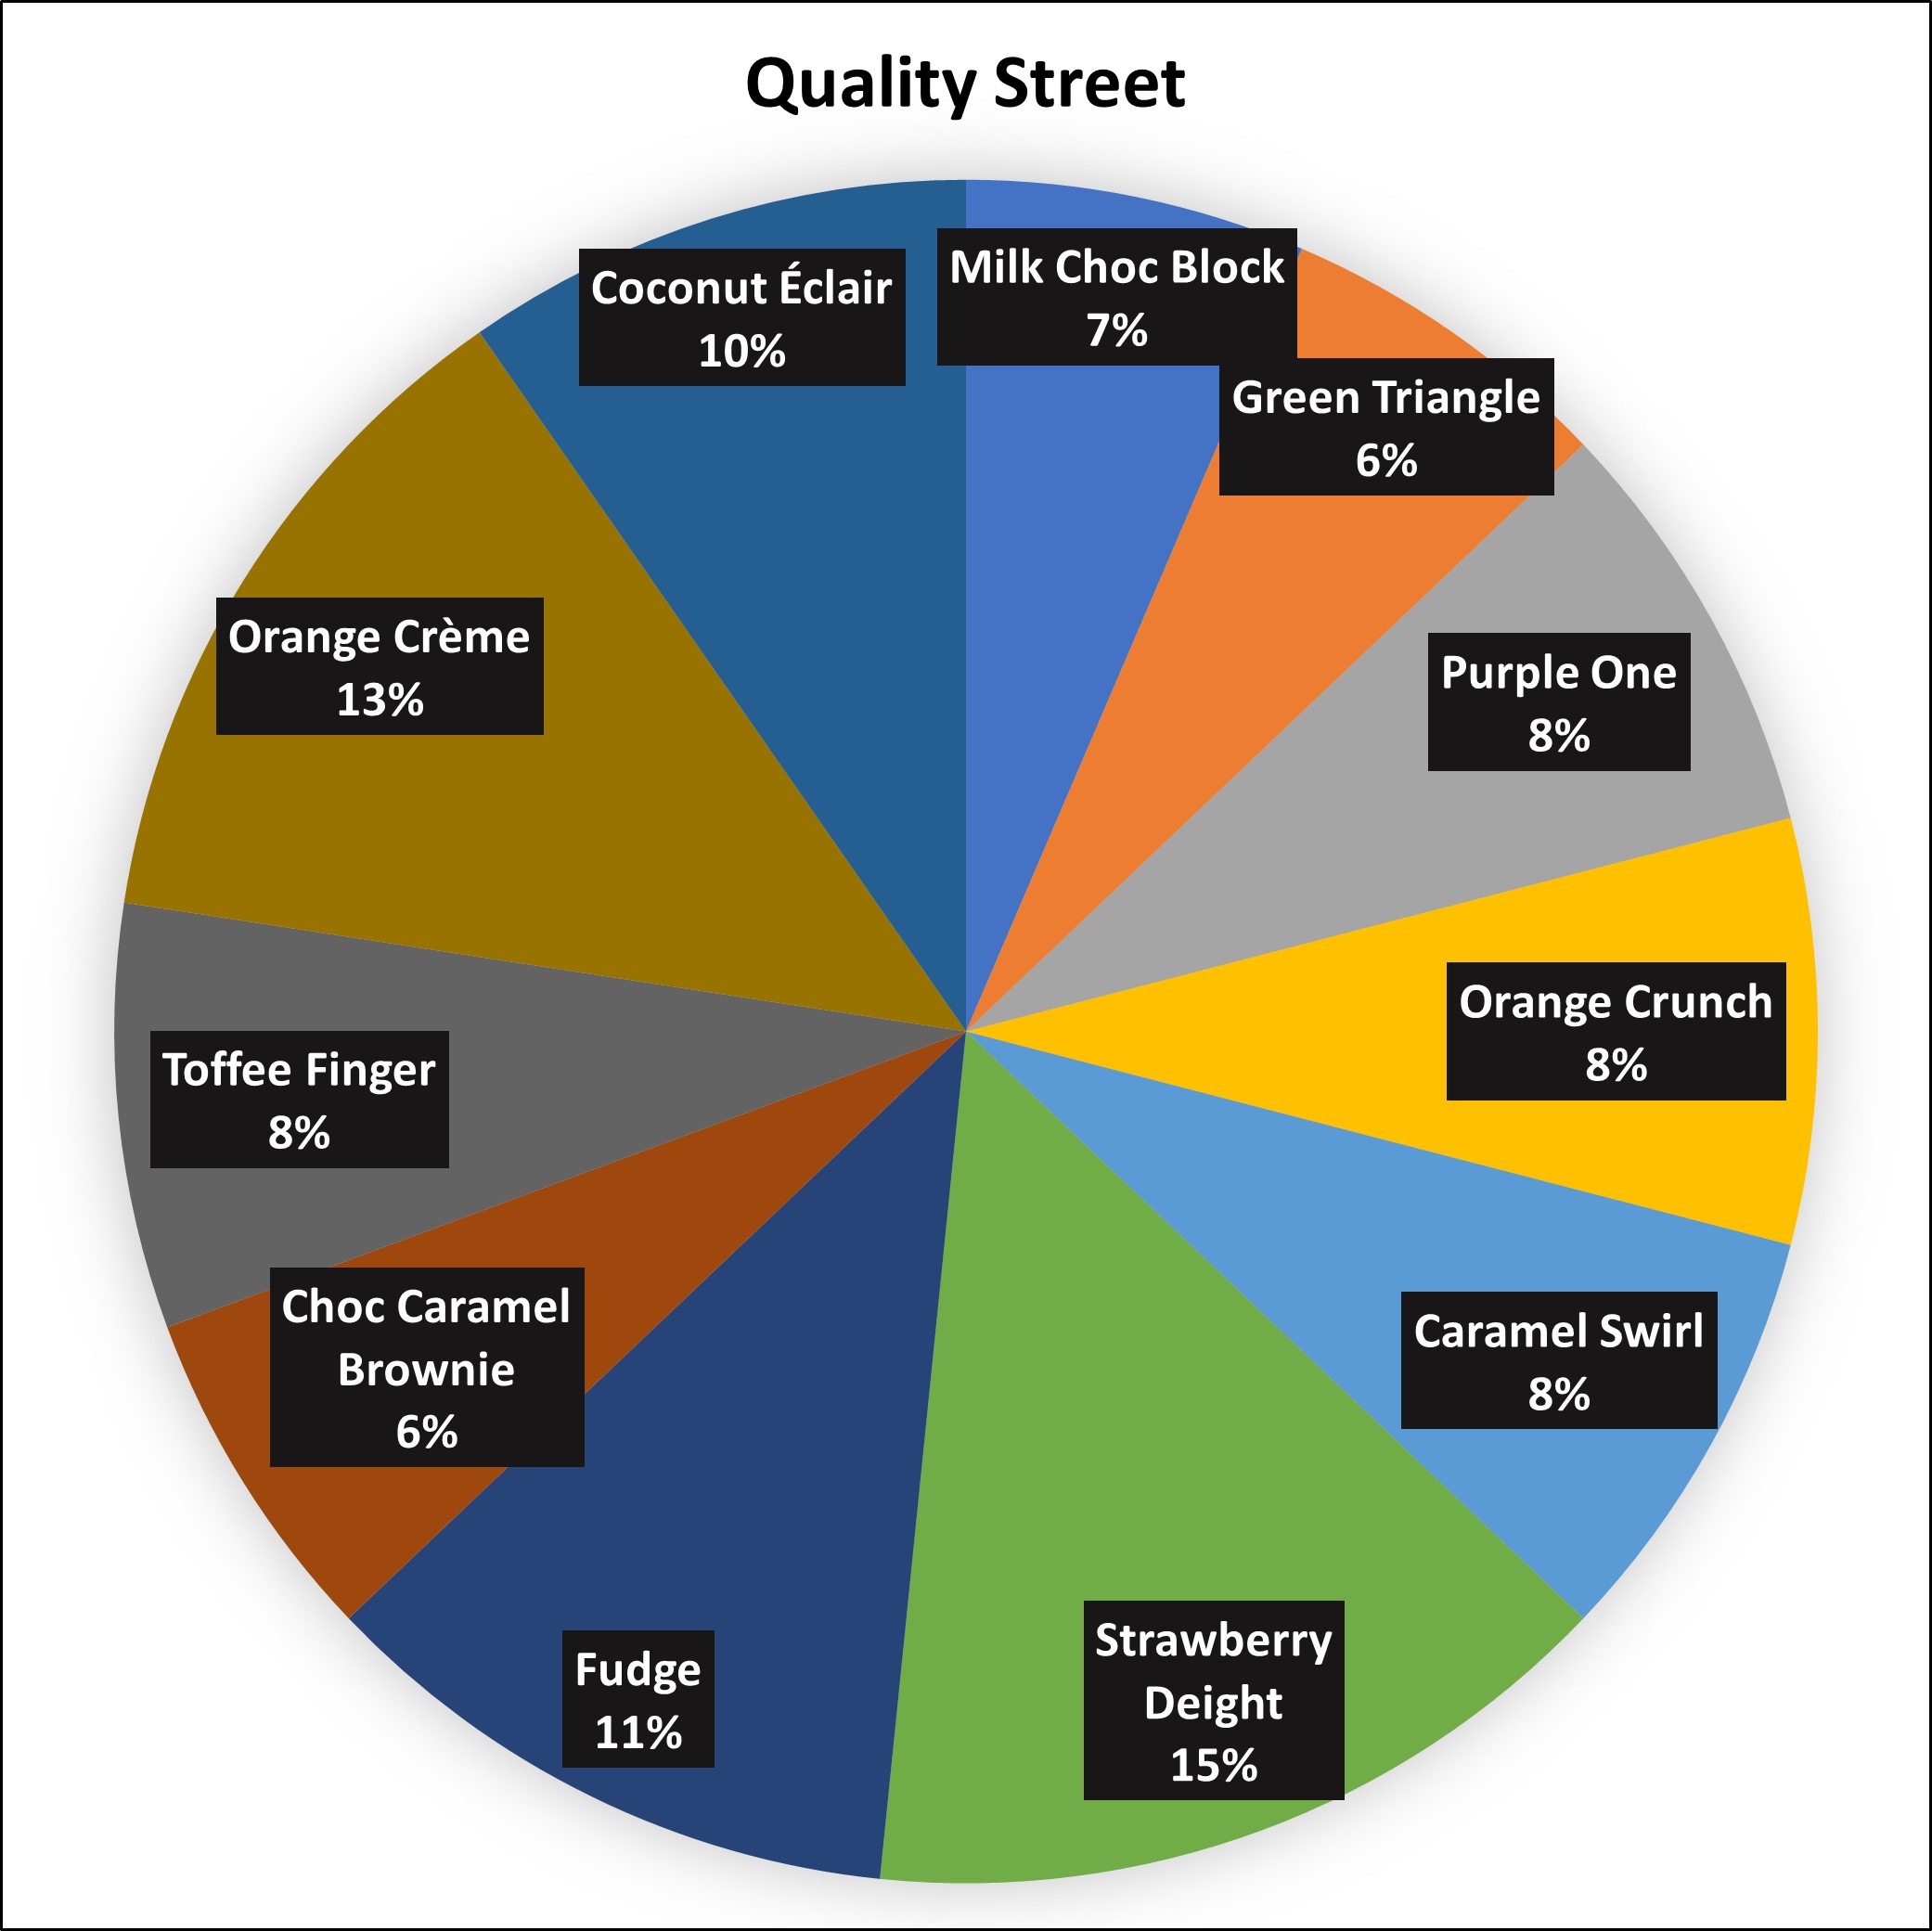 A pie chart showing the contents of a tin of Quality Street. It shows that the average box is made up of; 7% Milk Chocolate Block, 6% Green Triangle, 8% The Purple One, 8% Orange Crunch, 8% Caramel Swirl, 15% Strawberry Delight, 11% Fudge, 6% Chocolate Caramel Brownie, 8% Toffee Finger, 13% Orange Creme, 10% Coconut Eclair